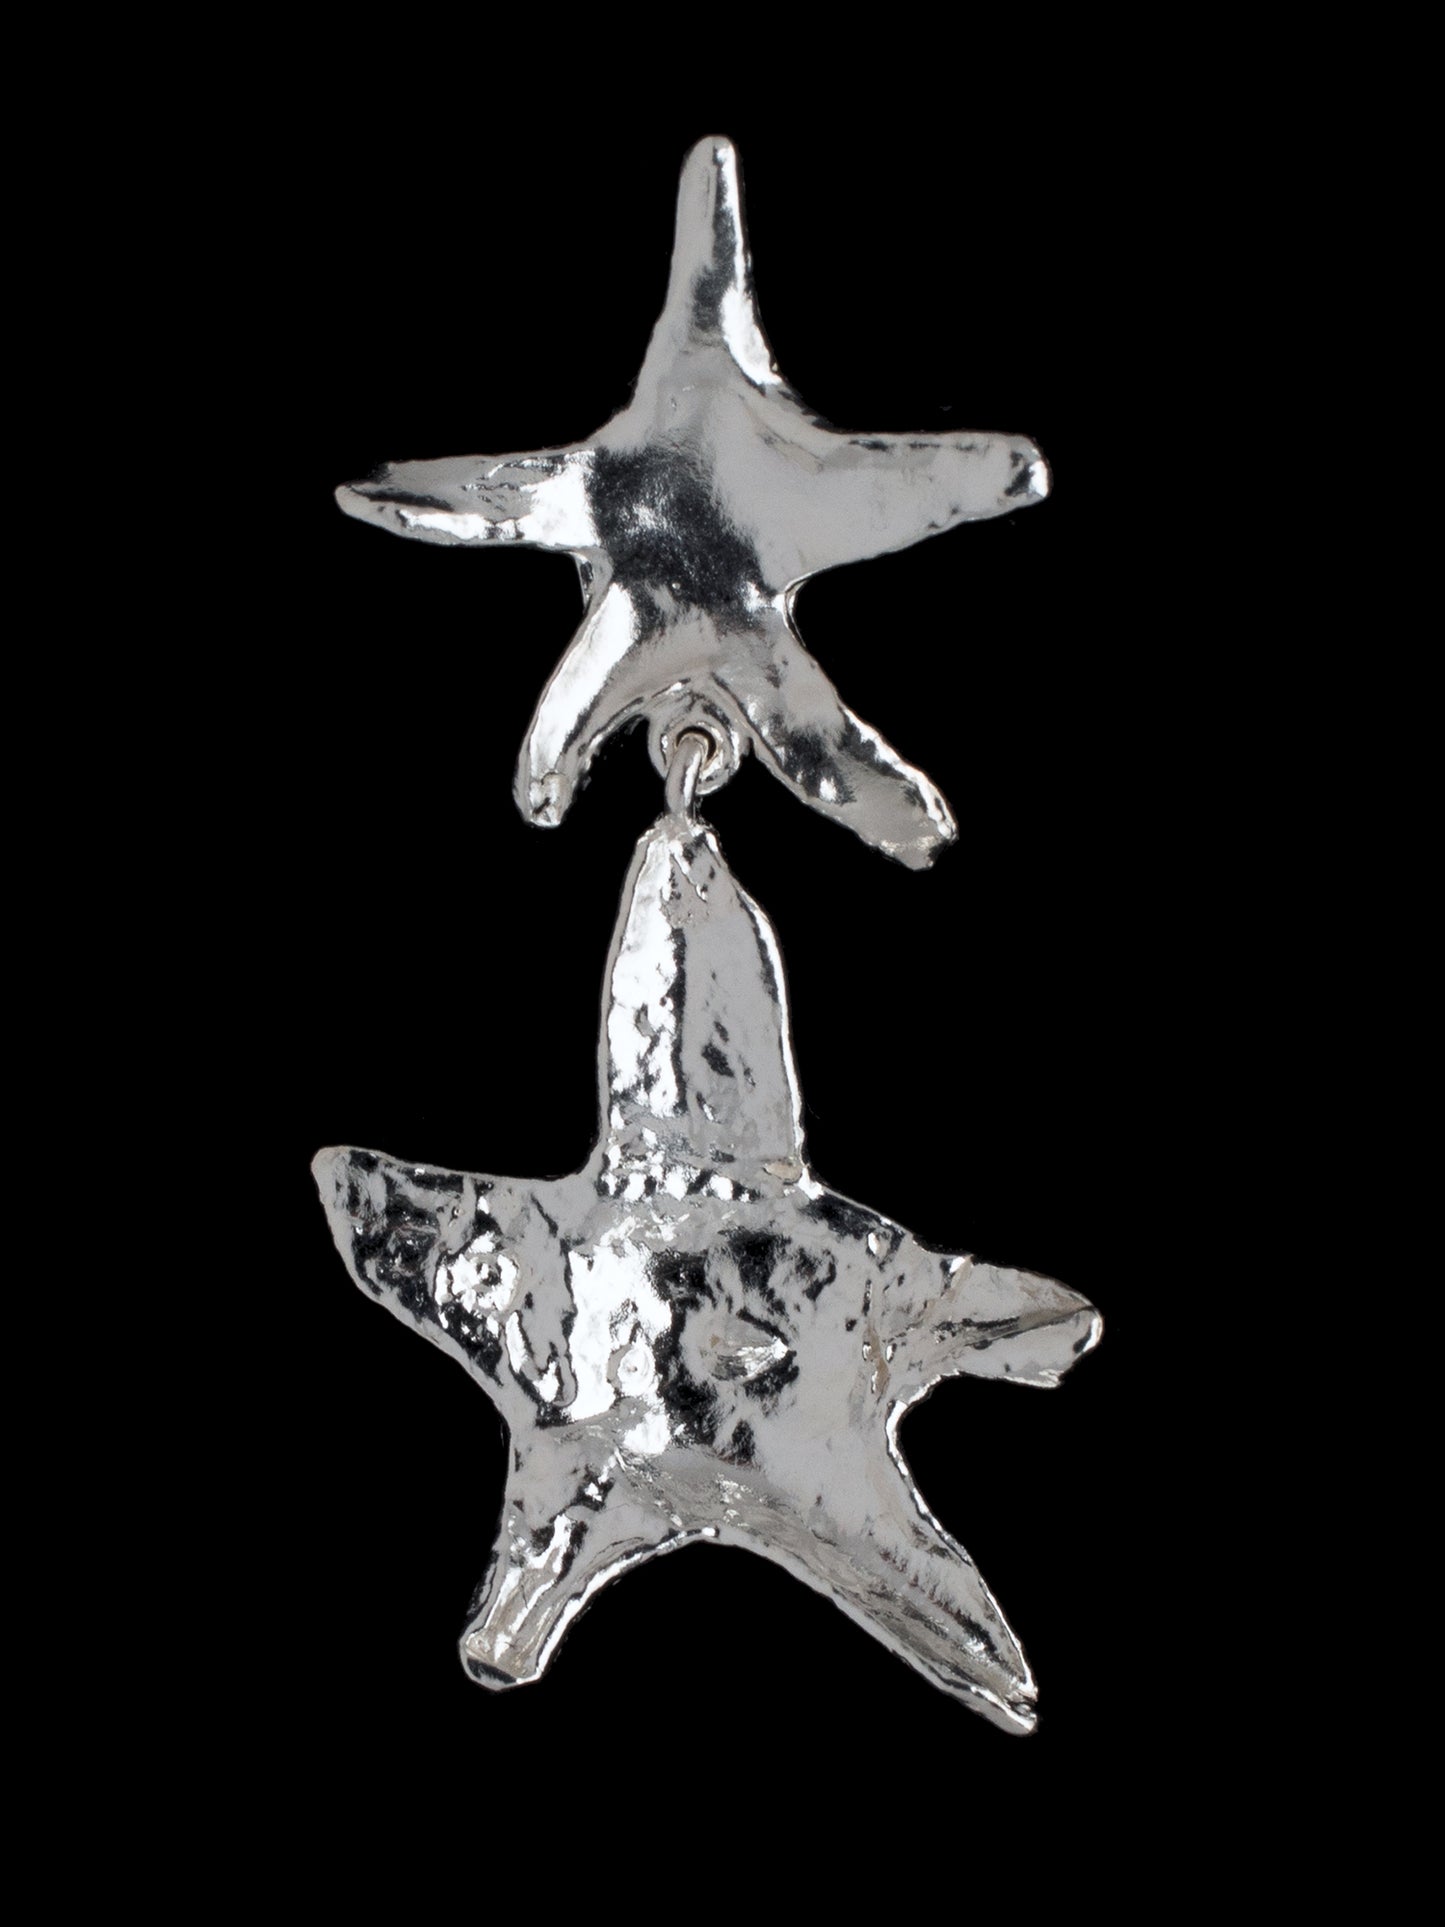 ORGANIC DOUBLE STAR-SHAPED PENDANT EARRINGS HANDMADE IN RECYCLED SILVER - CLOSEUP